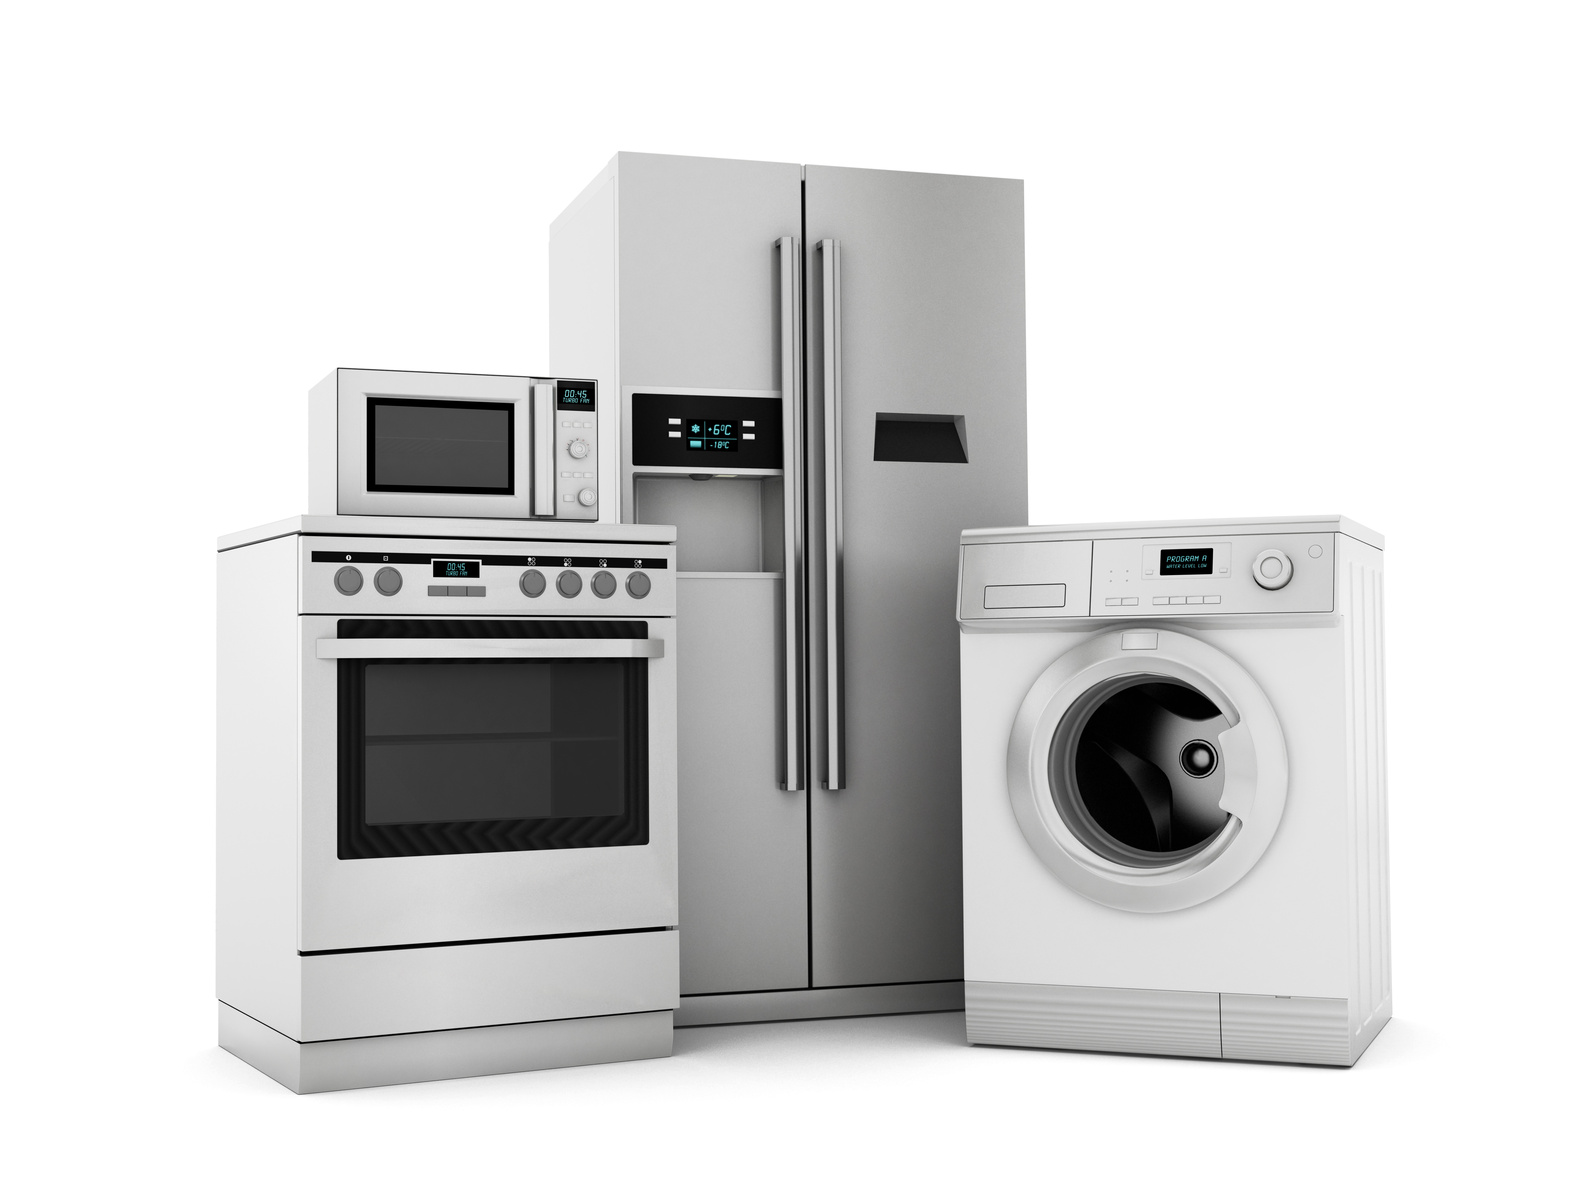 Environmental Concerns – Why We Need to Recycle Appliances